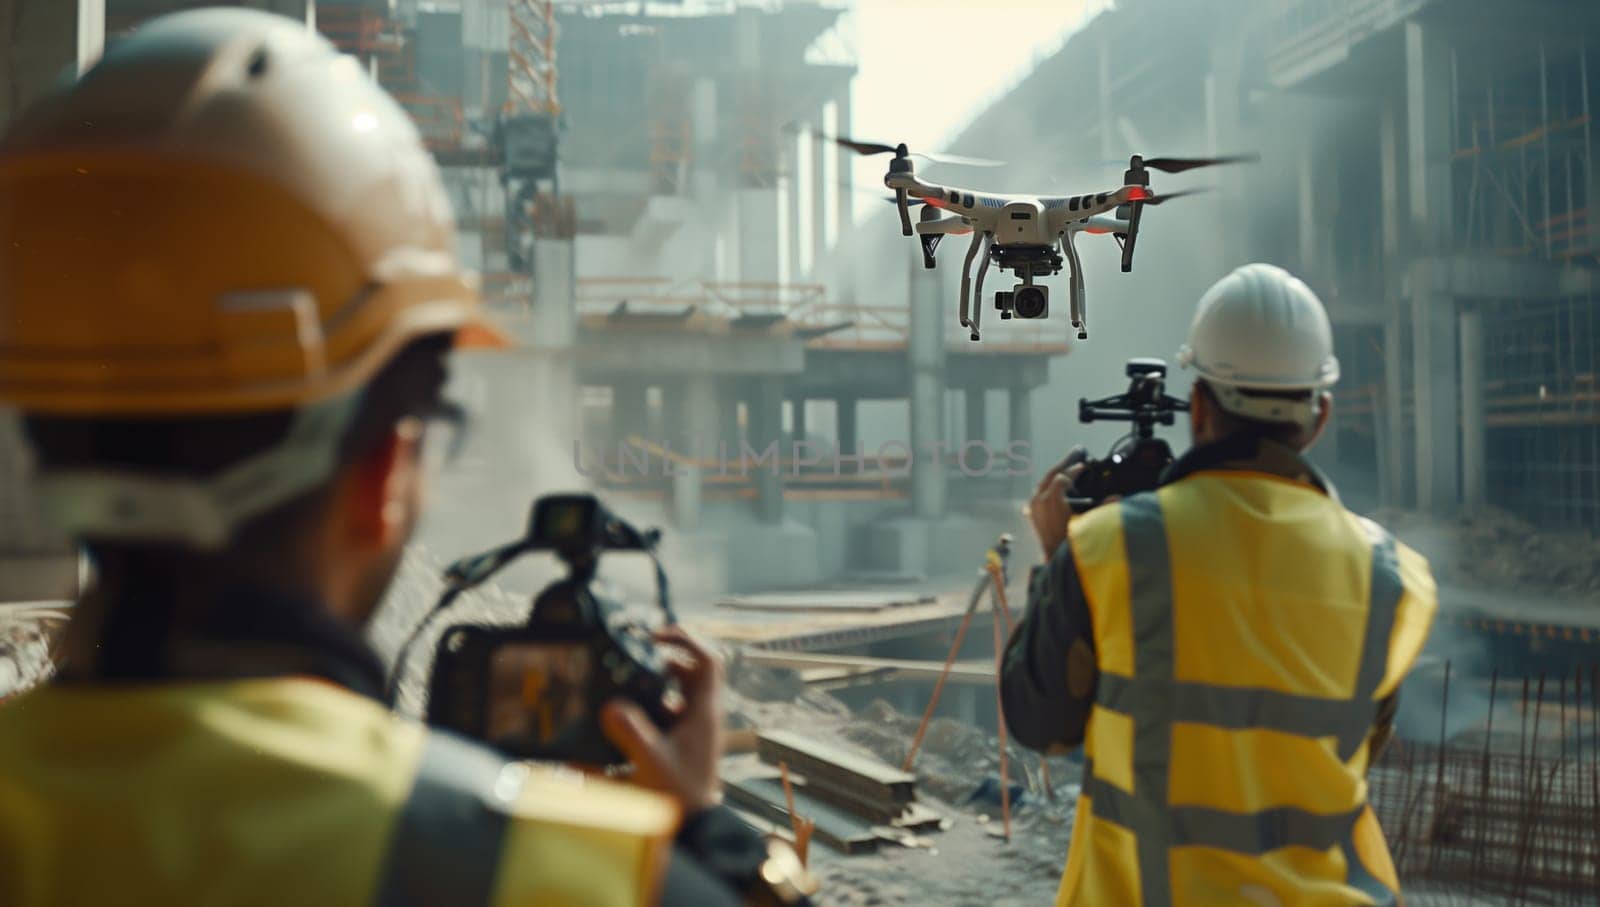 A man is capturing an engineering event with a drone flying over a construction site. He is wearing personal protective equipment, including a helmet, near a water vehicle. The machine is on the job